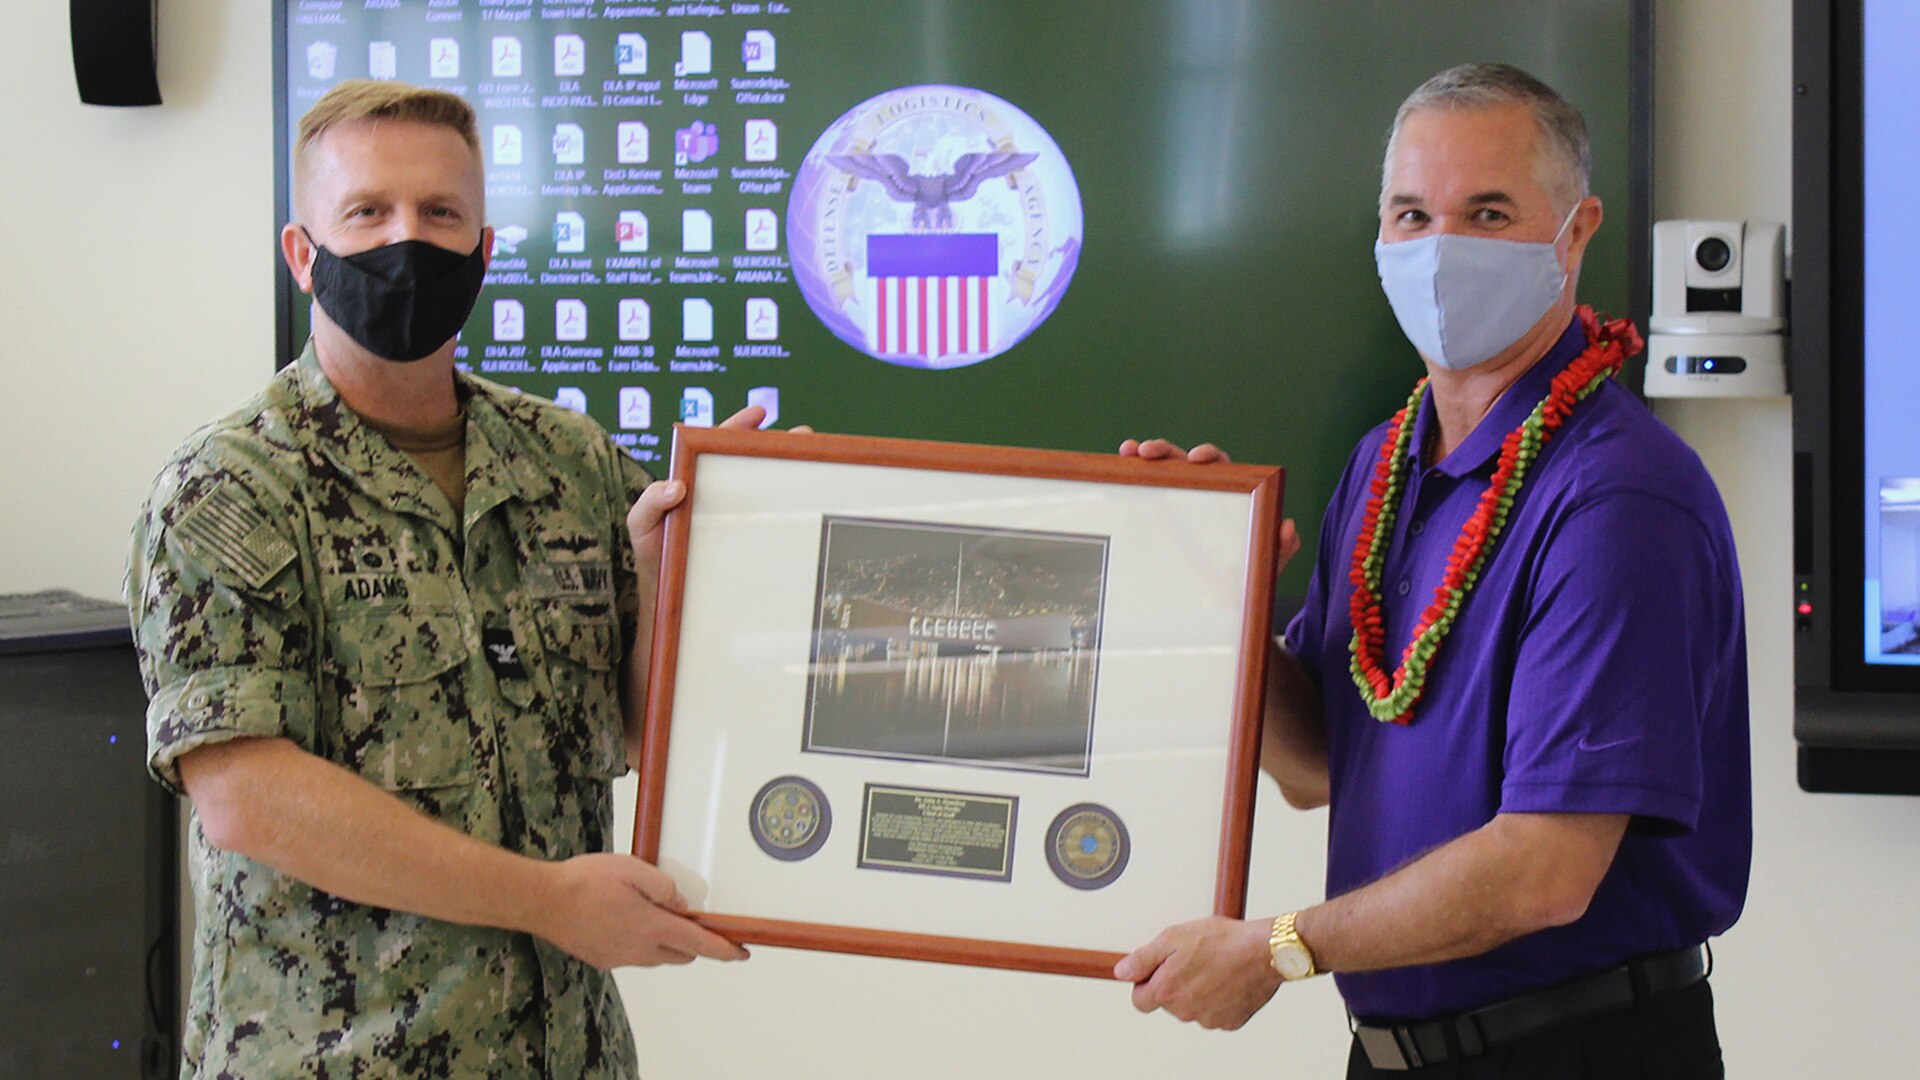 Commander presenting farewell plaque to an employee.